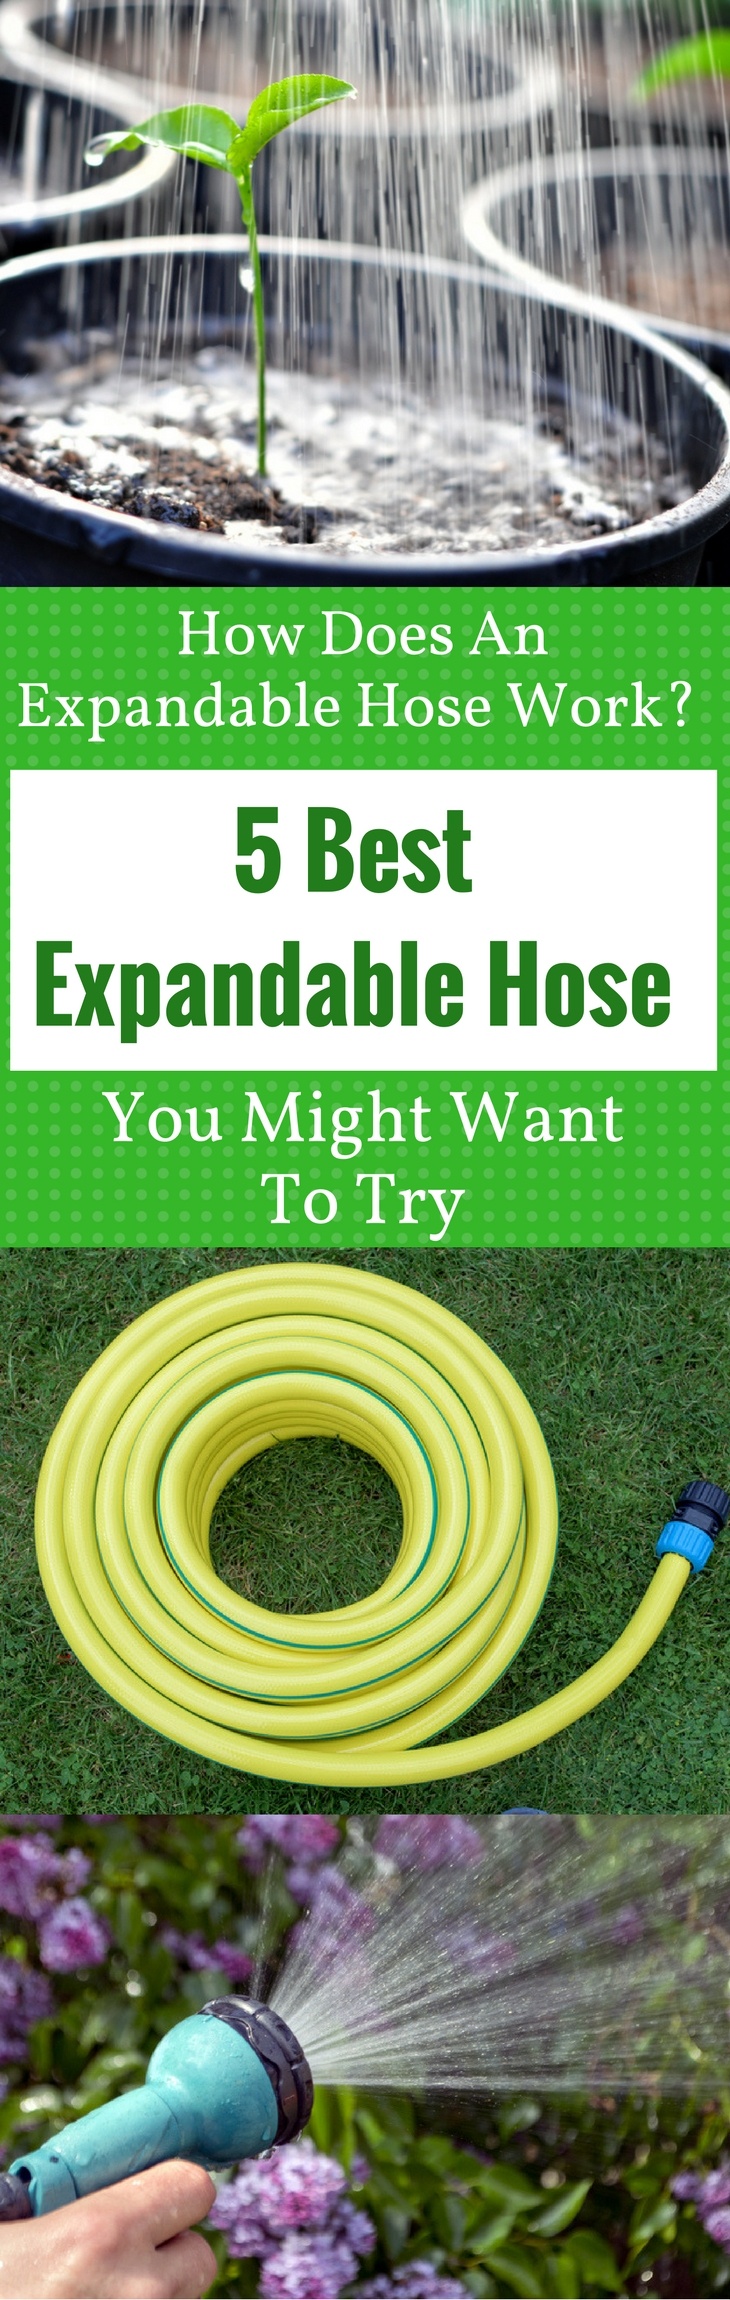 5 Best Expandable Hose You Might Want To Try pin it